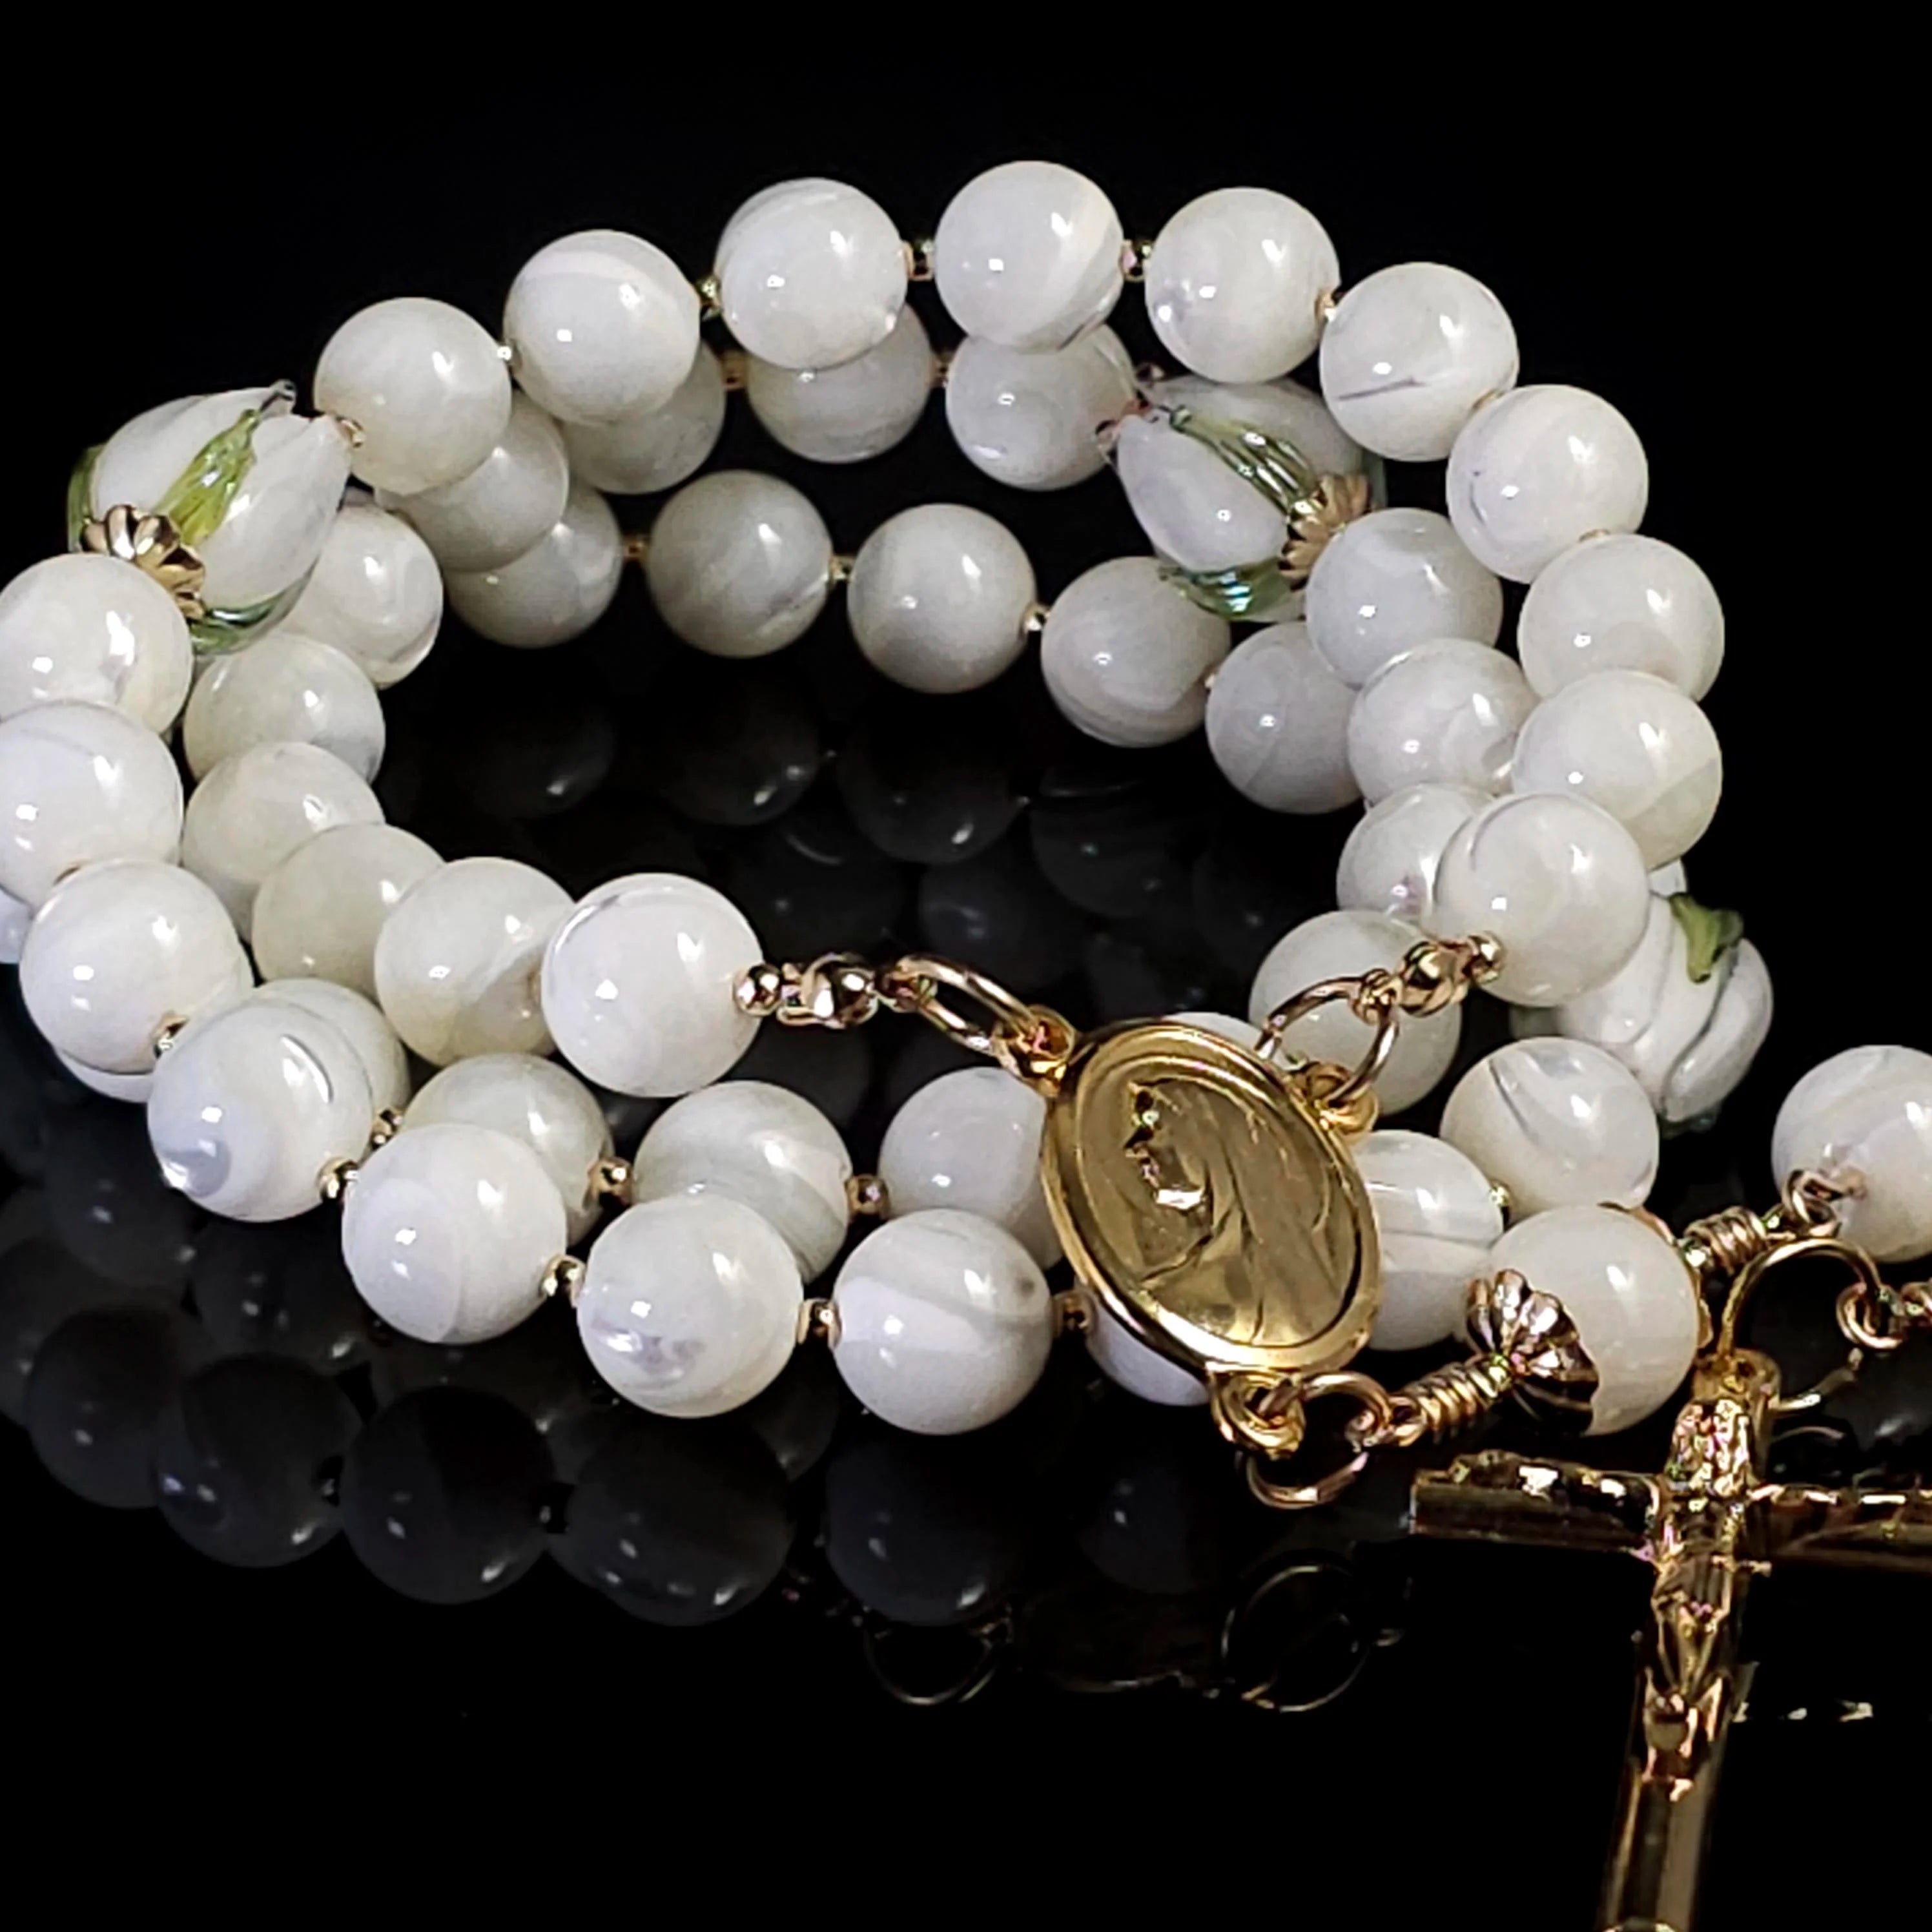 Pearl white rosary adorned with gold Madonna medal.